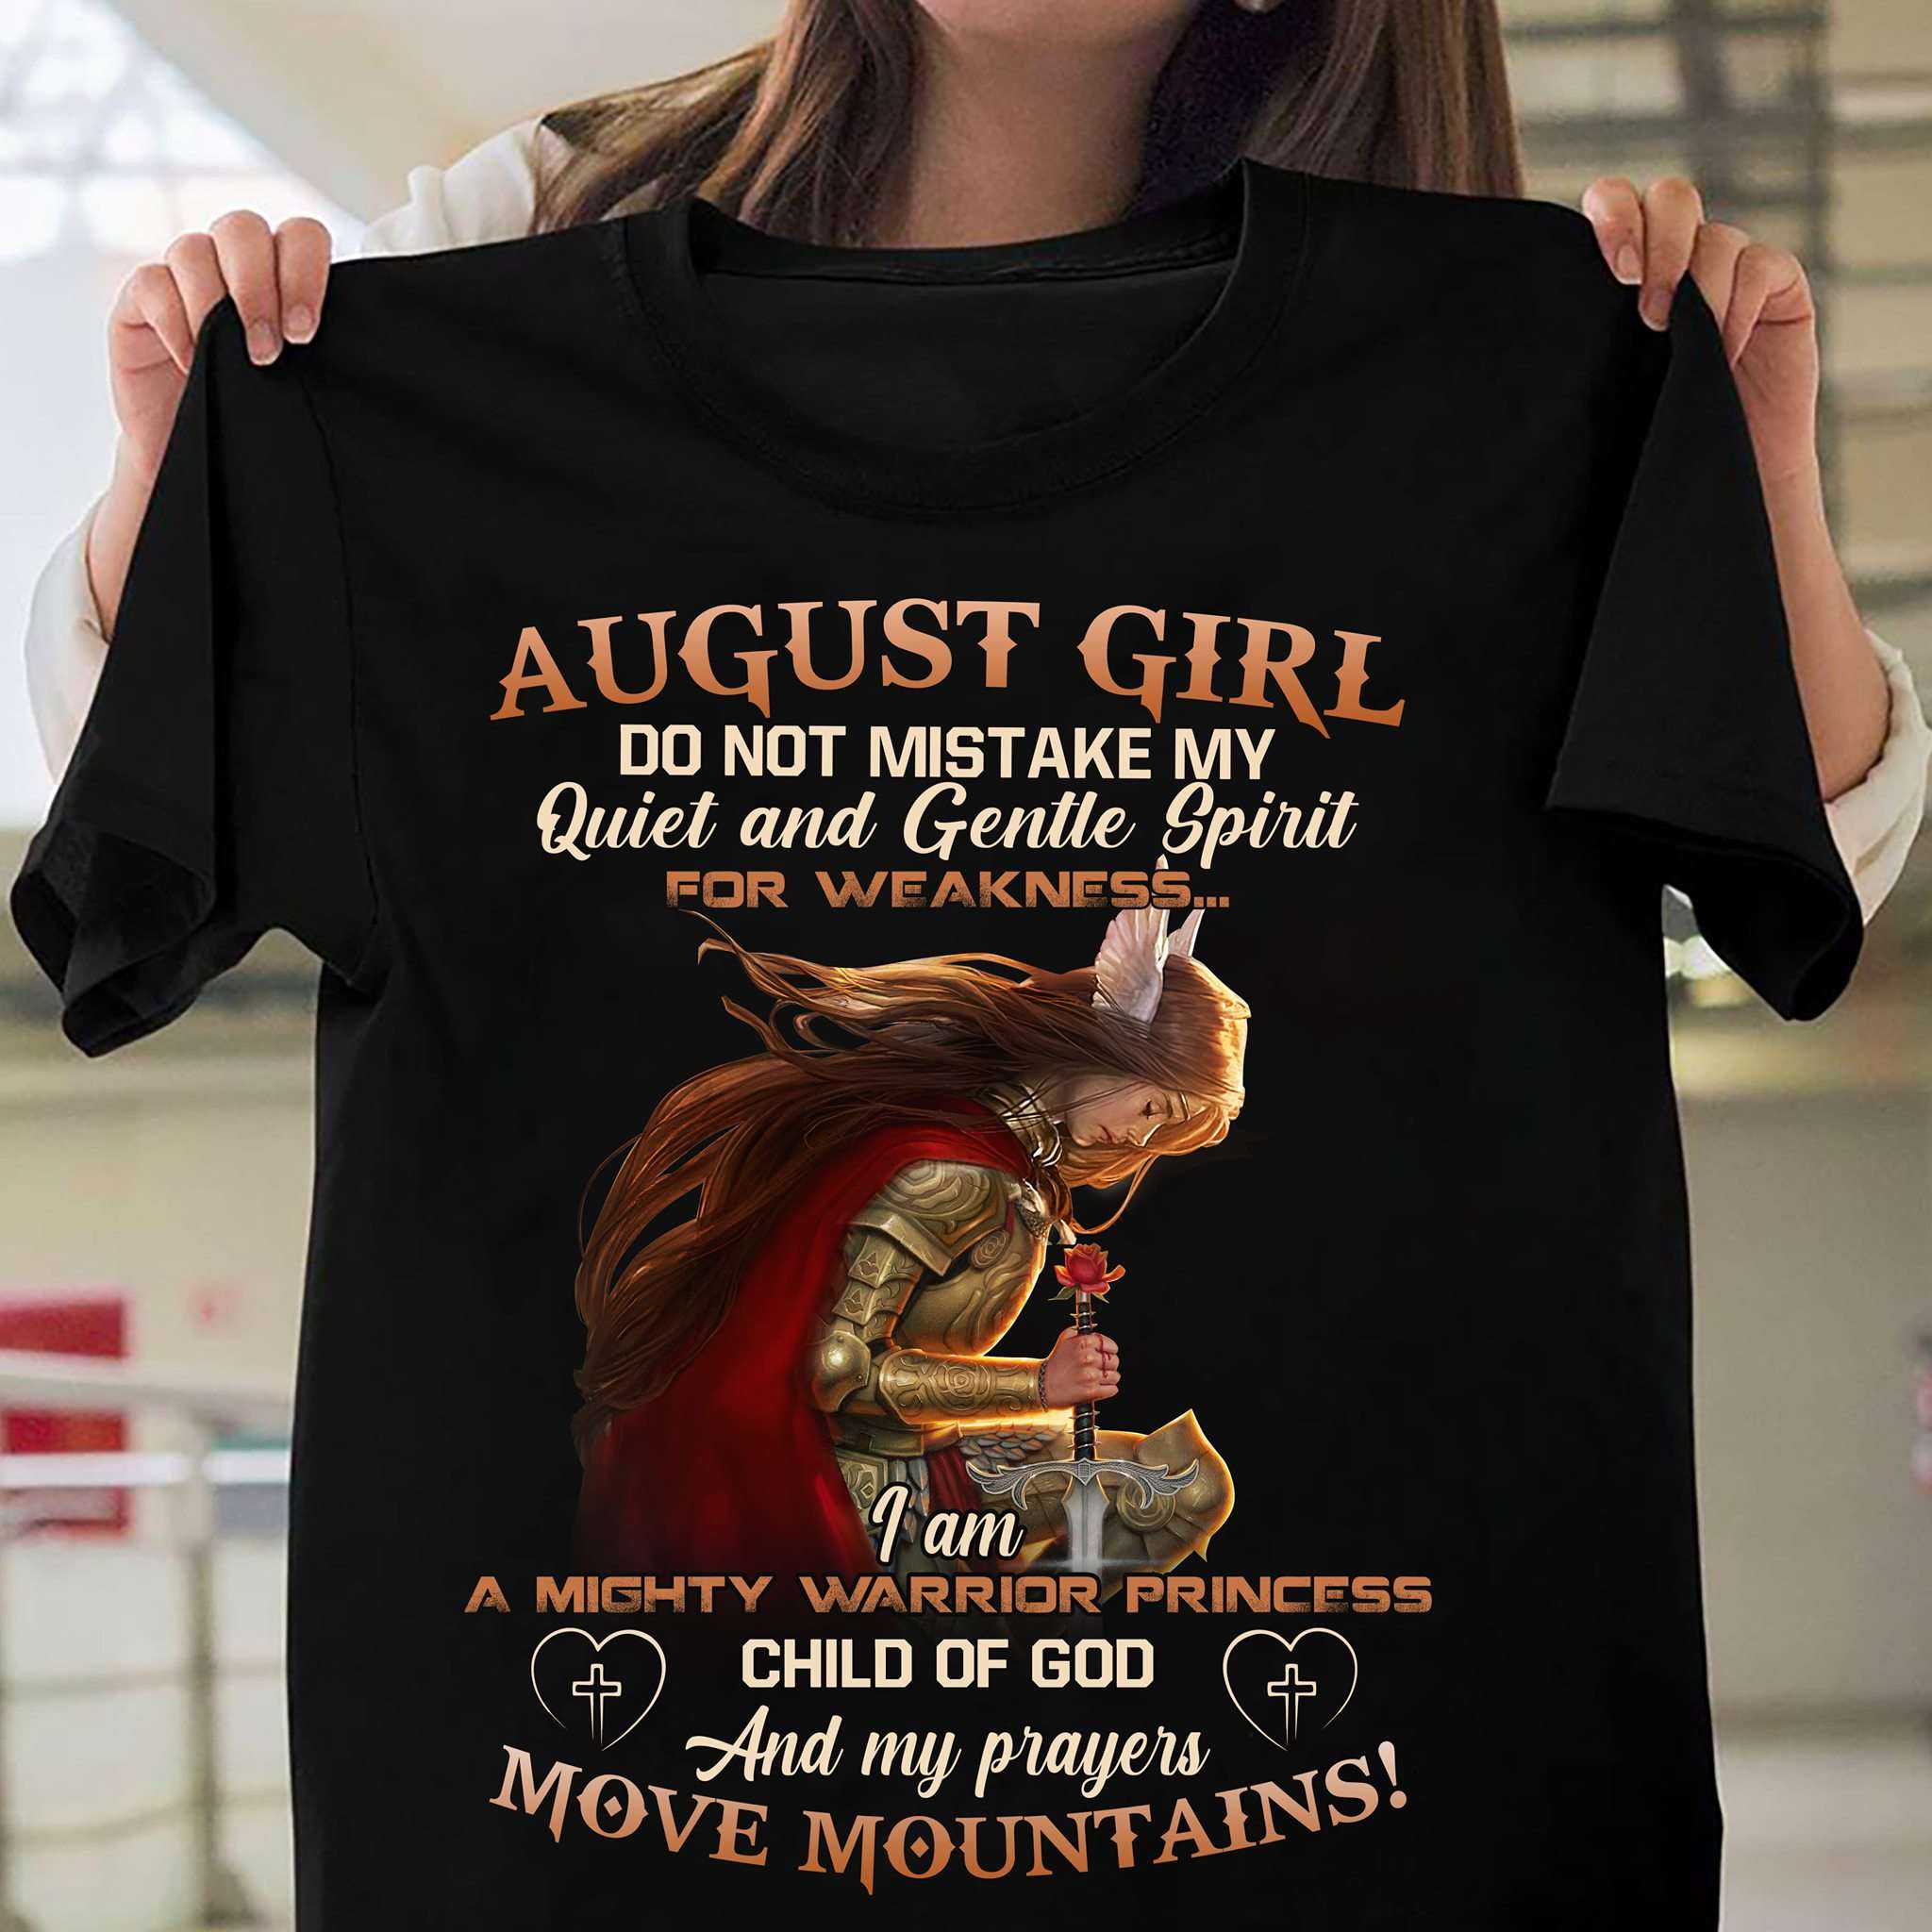 August girl do not mistake my quiet and gentle spirit for weakness - Mighty warrior princess, knight princess